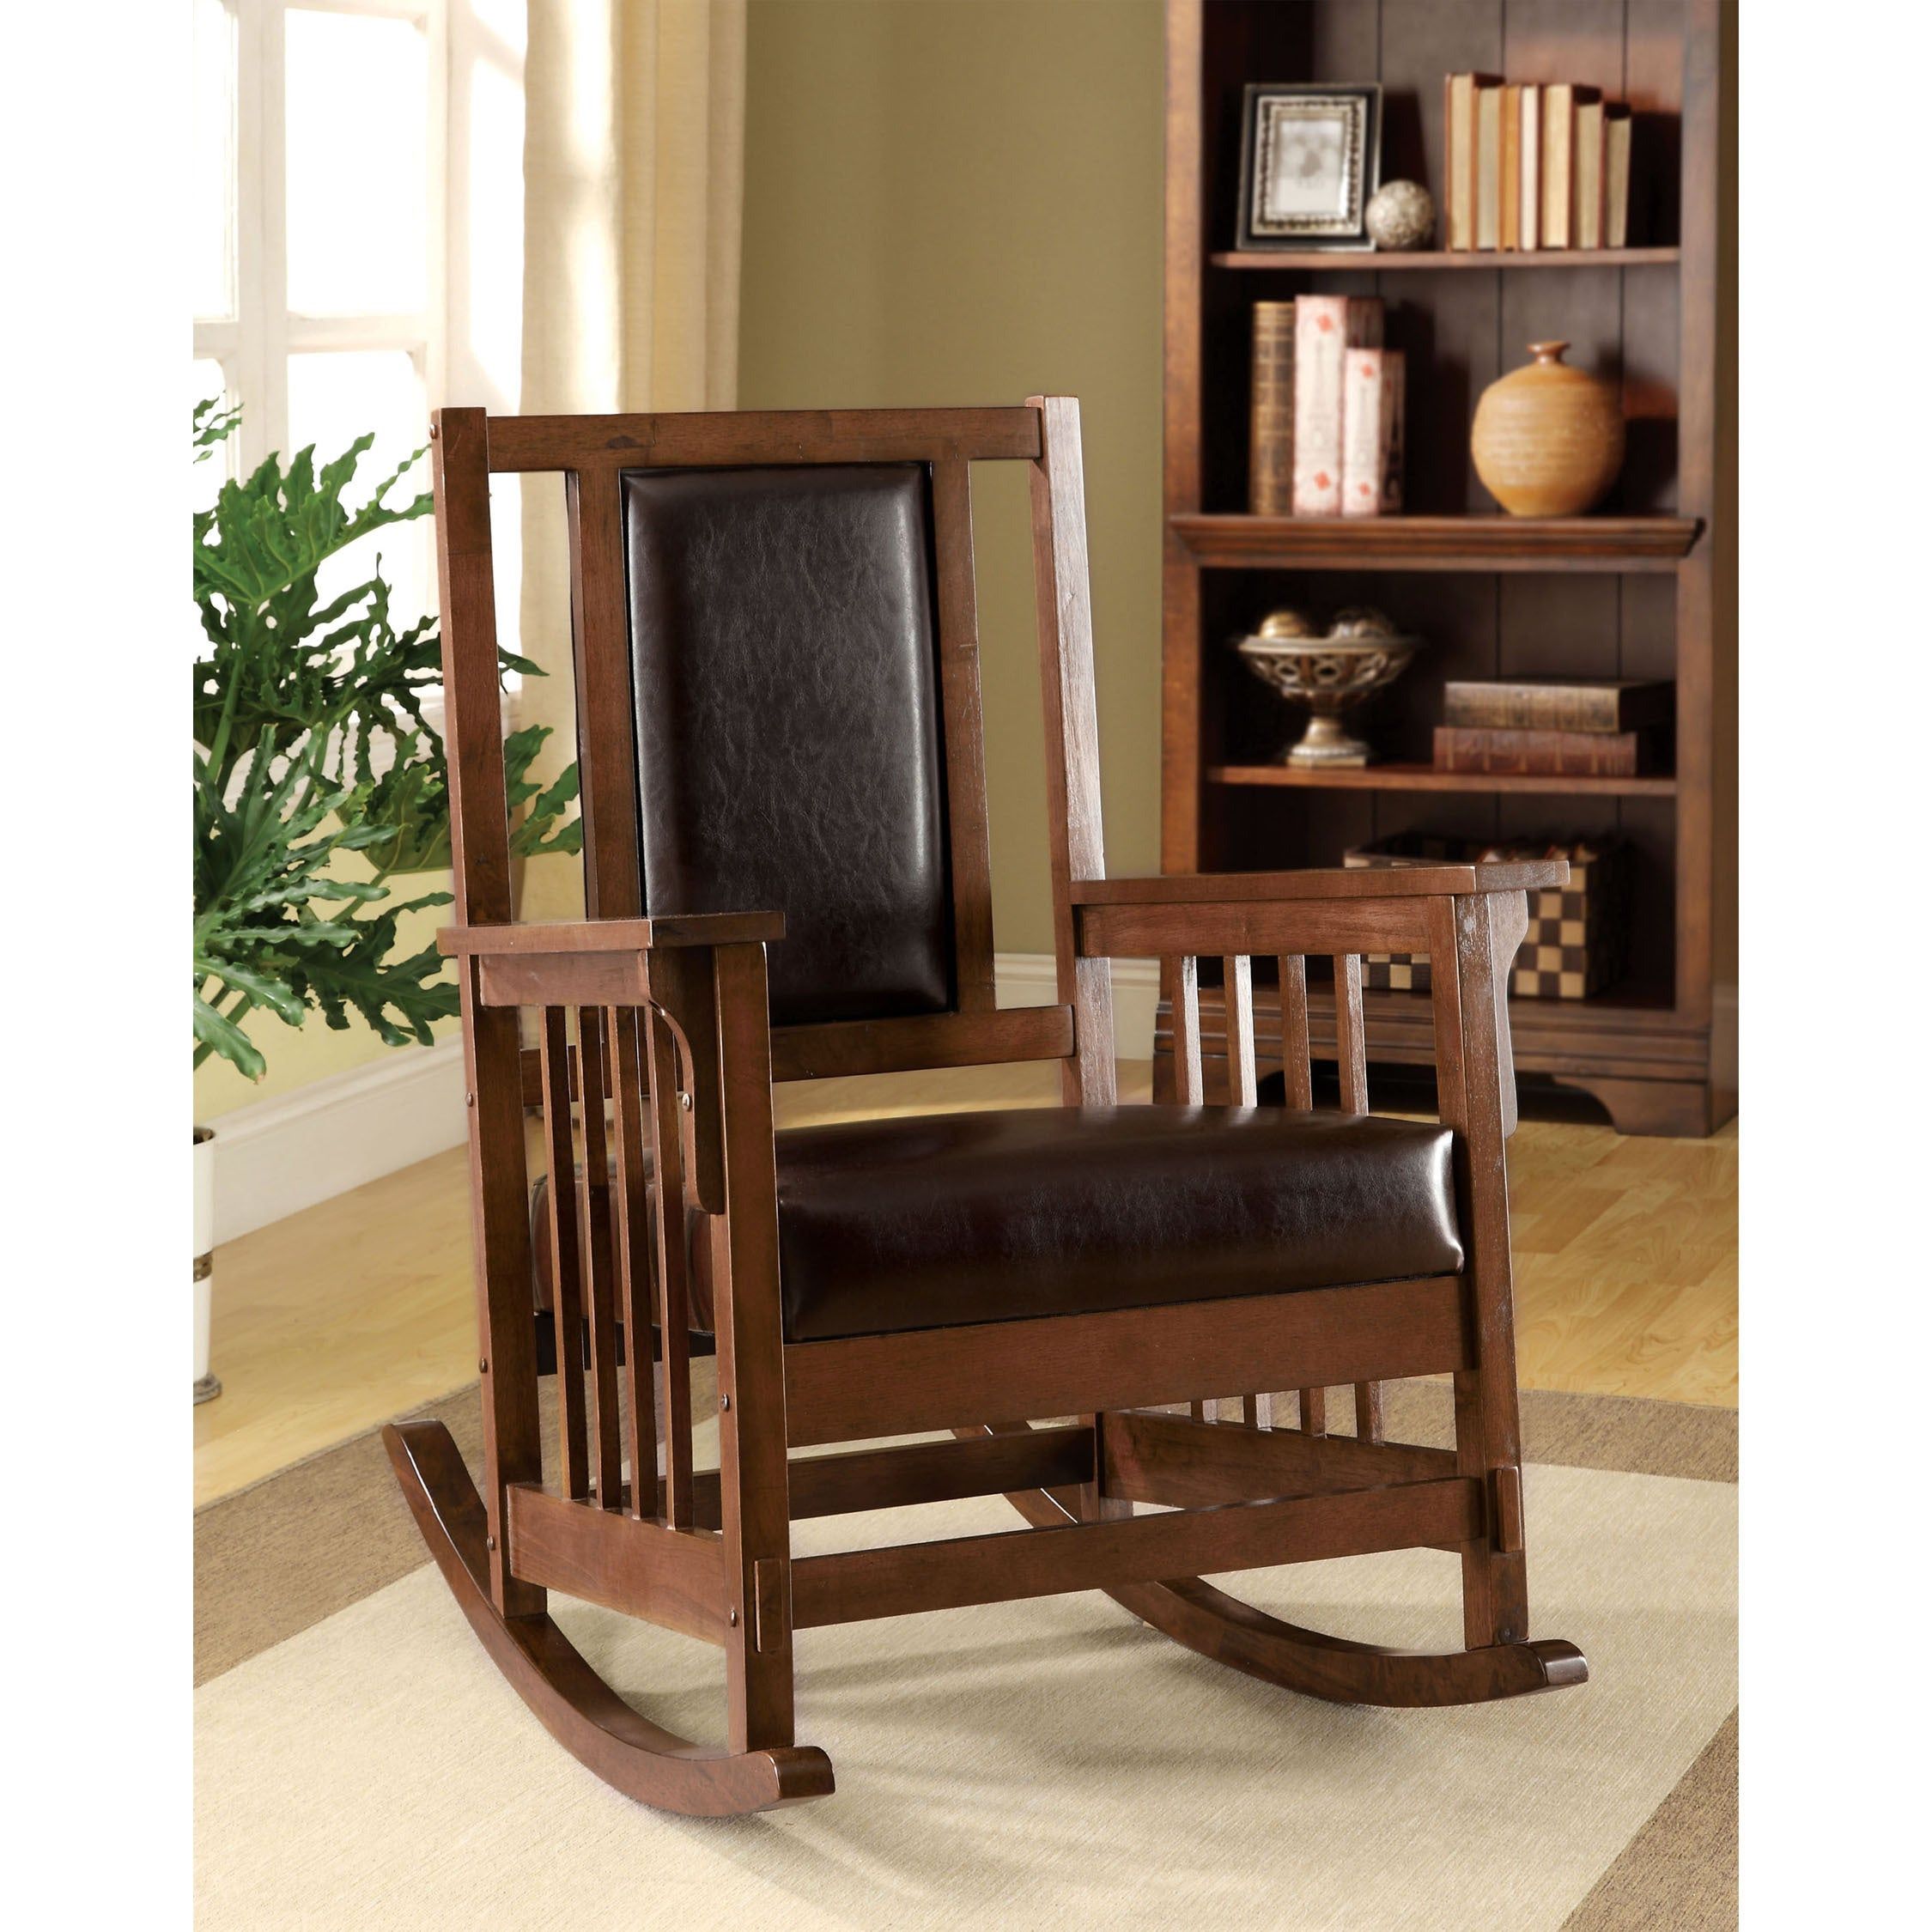 Buy Rocking Chairs, Traditional Living Room Chairs Online At Regarding Judson Traditional Rocking Chairs (View 4 of 20)